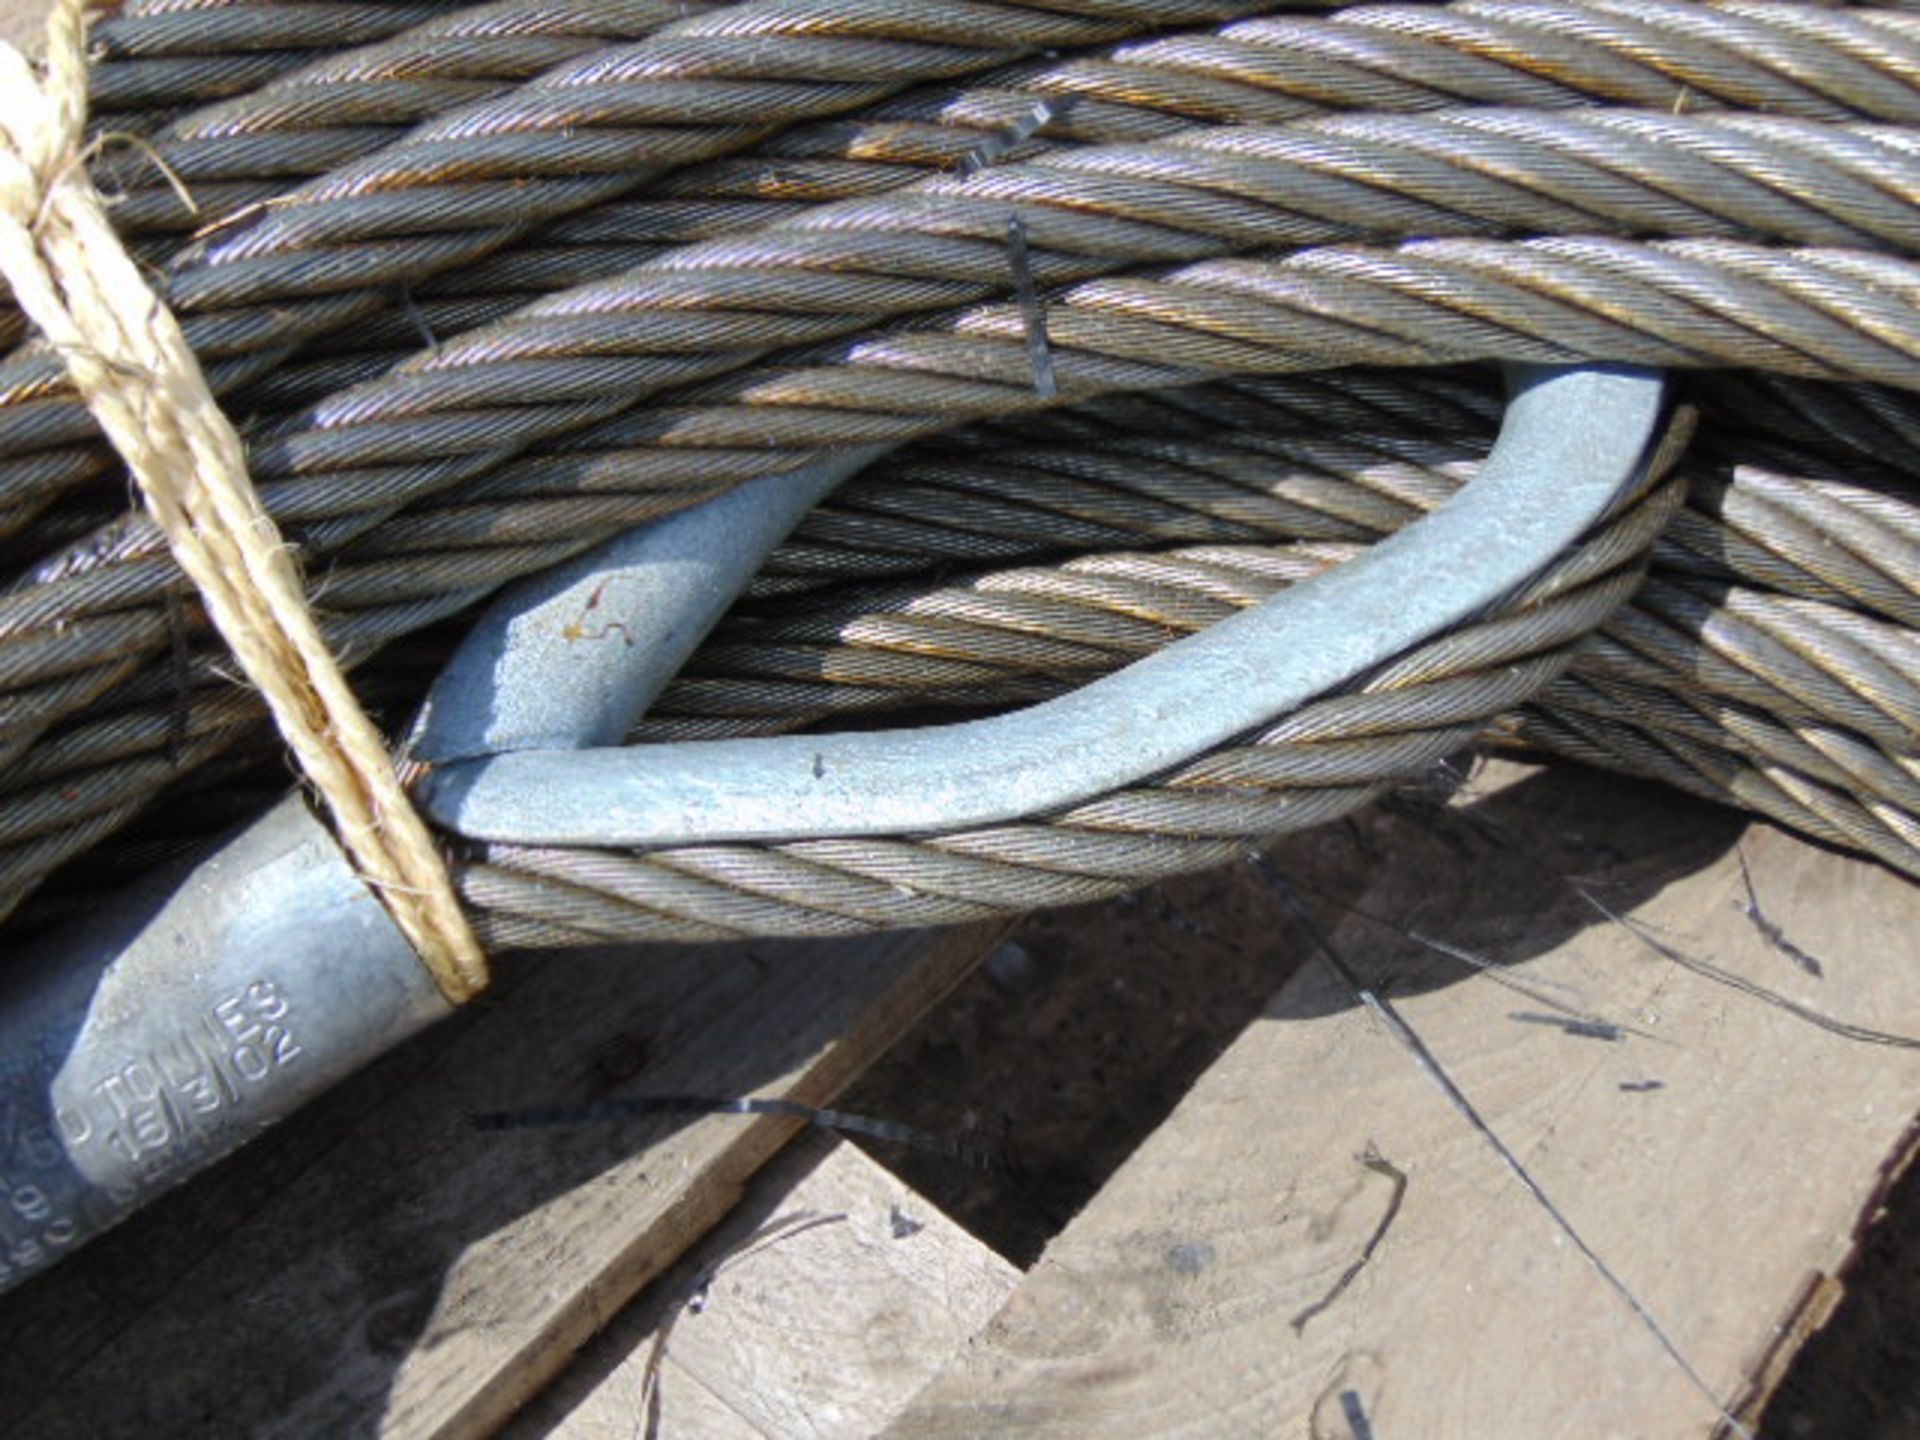 Heavy Duty Hall Bros Roll of 60m 19mm 21.5 tonne Crane/Winch Wire Rope - Image 2 of 5